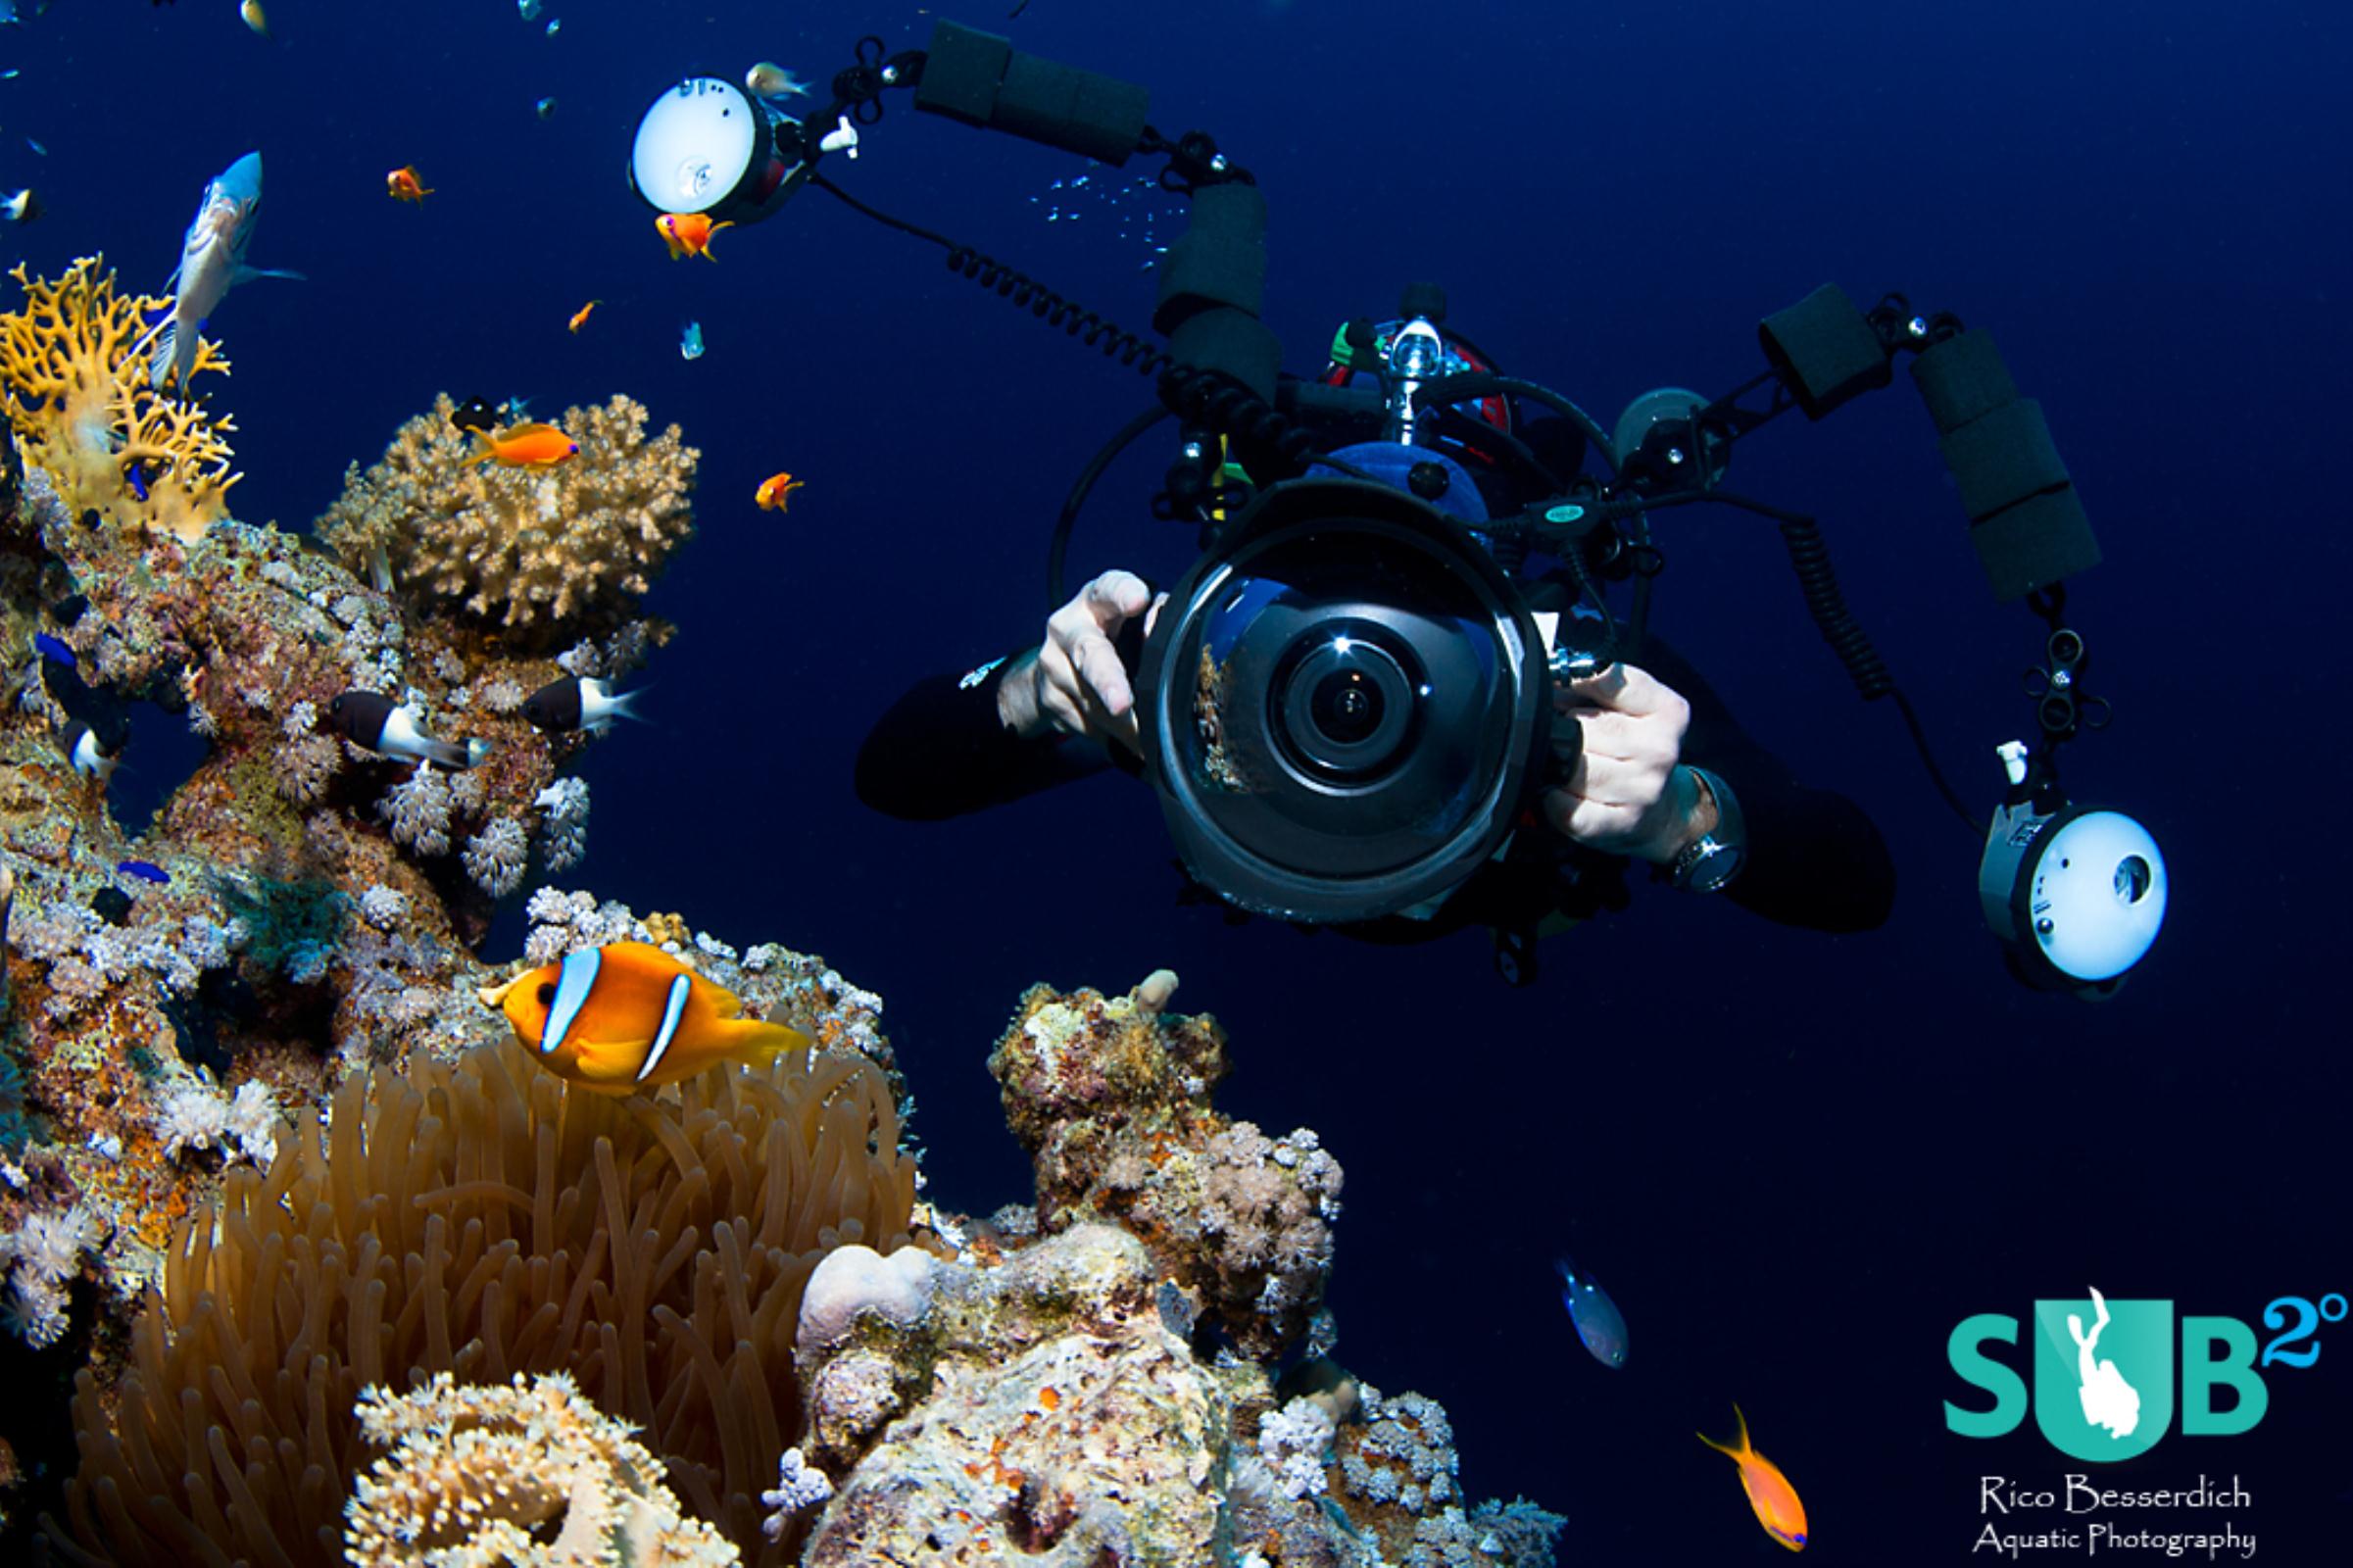 Wide-angle scene. Getting close ( 30 cm distance to the anemone-fish here ) boosts colours & tension.